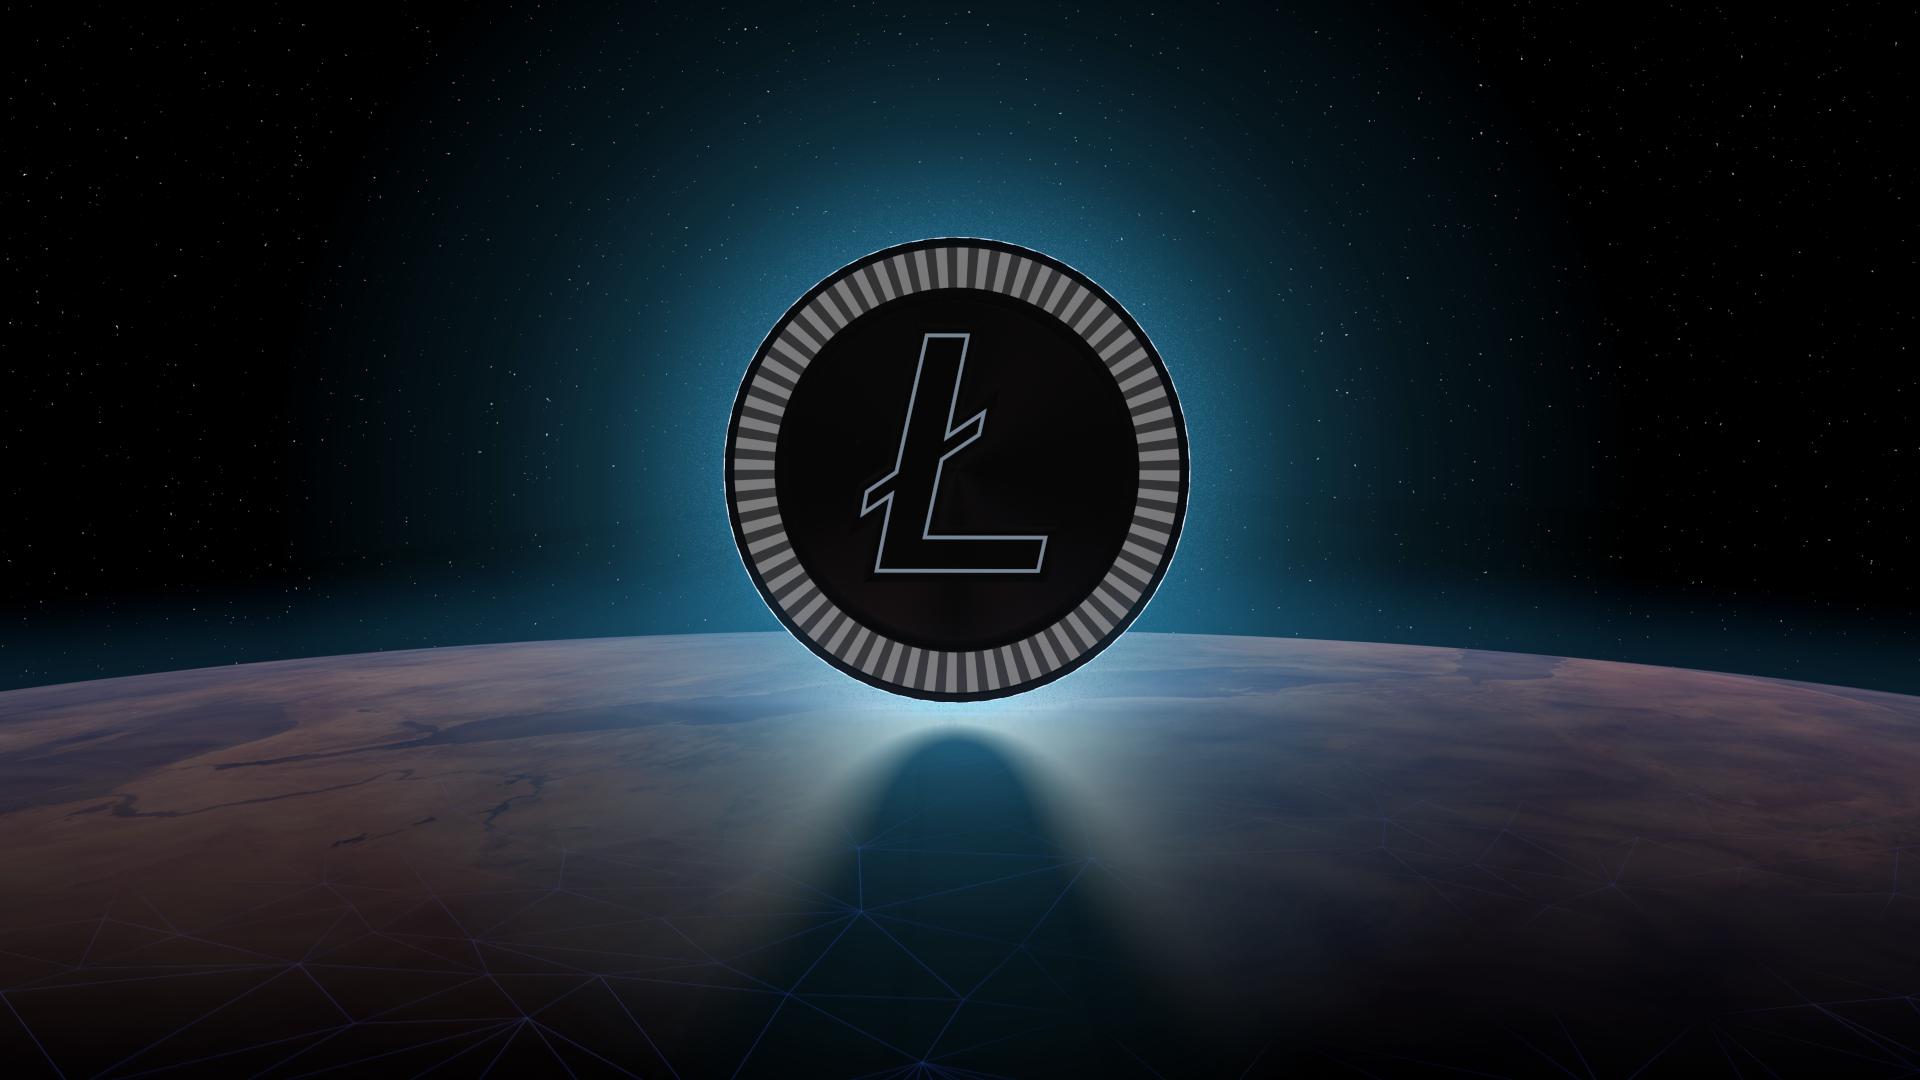 Litecoin Wallpapers Top Free Litecoin Backgrounds Wallpaperaccess Images, Photos, Reviews